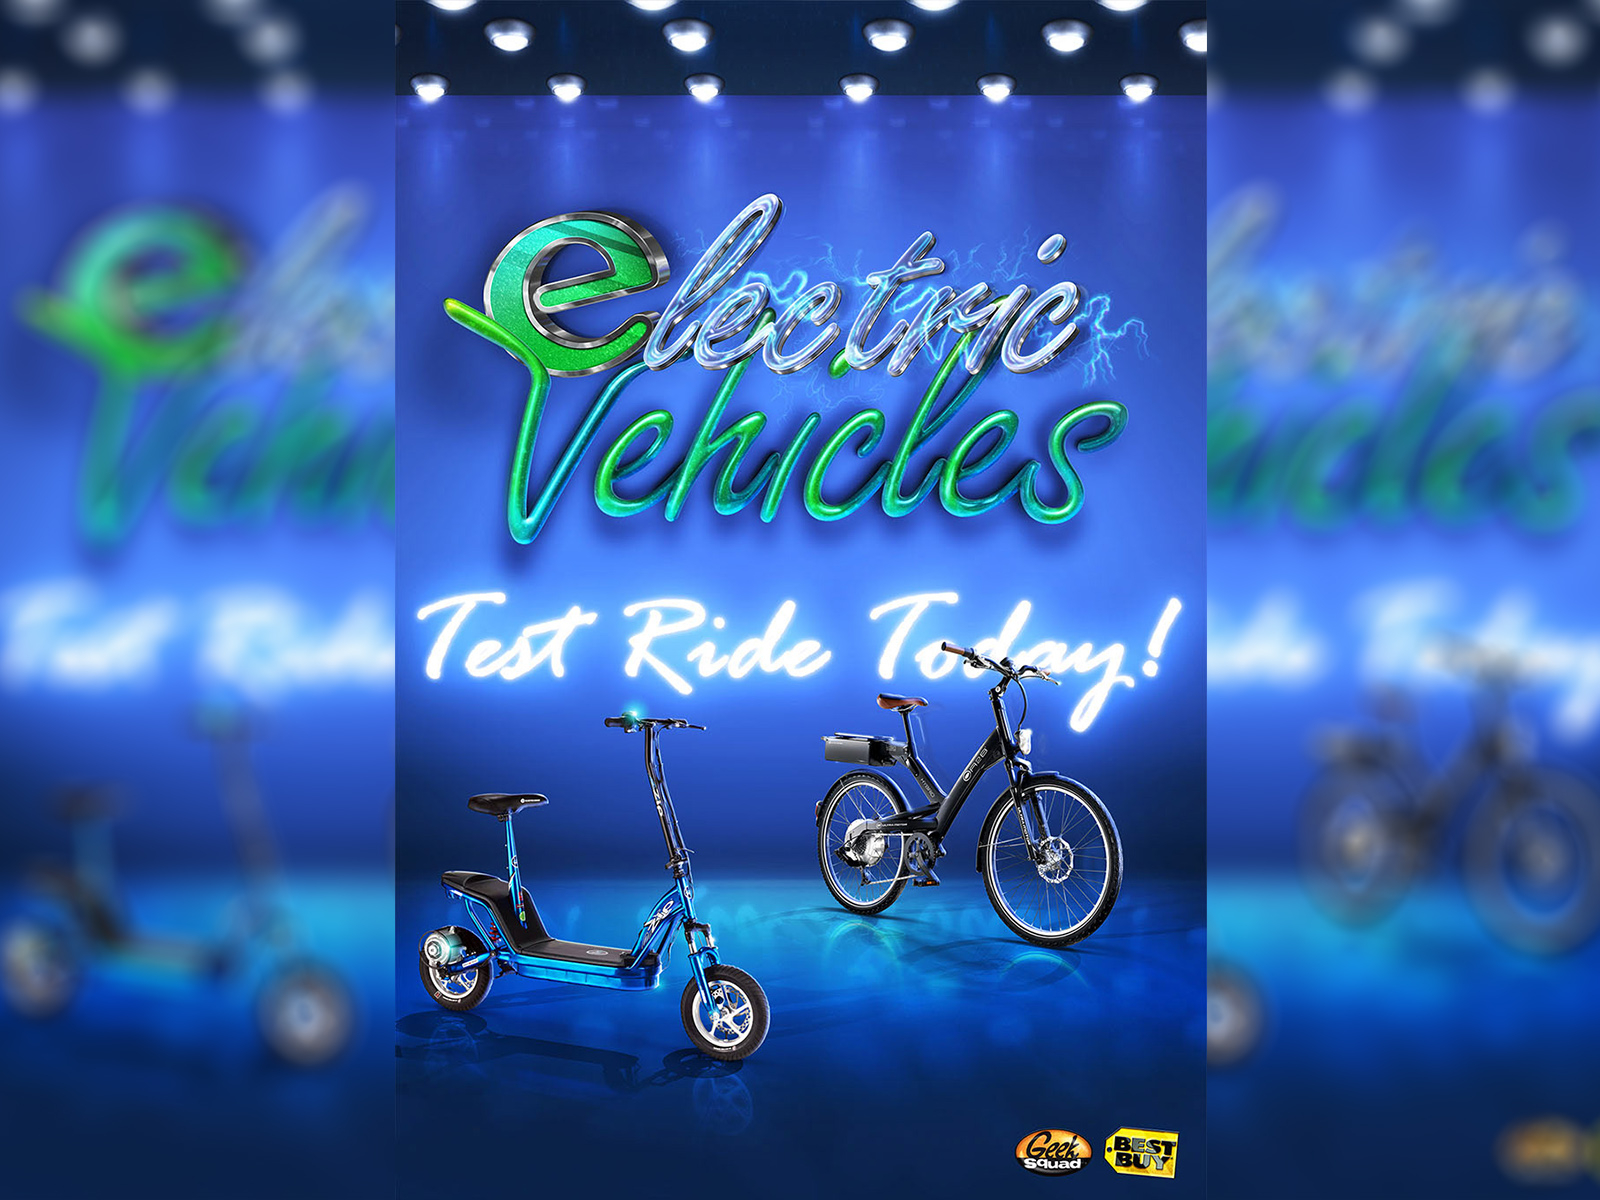 Best Buy Electric Vehicles Poster by Design By Chyldish, INC. on Dribbble